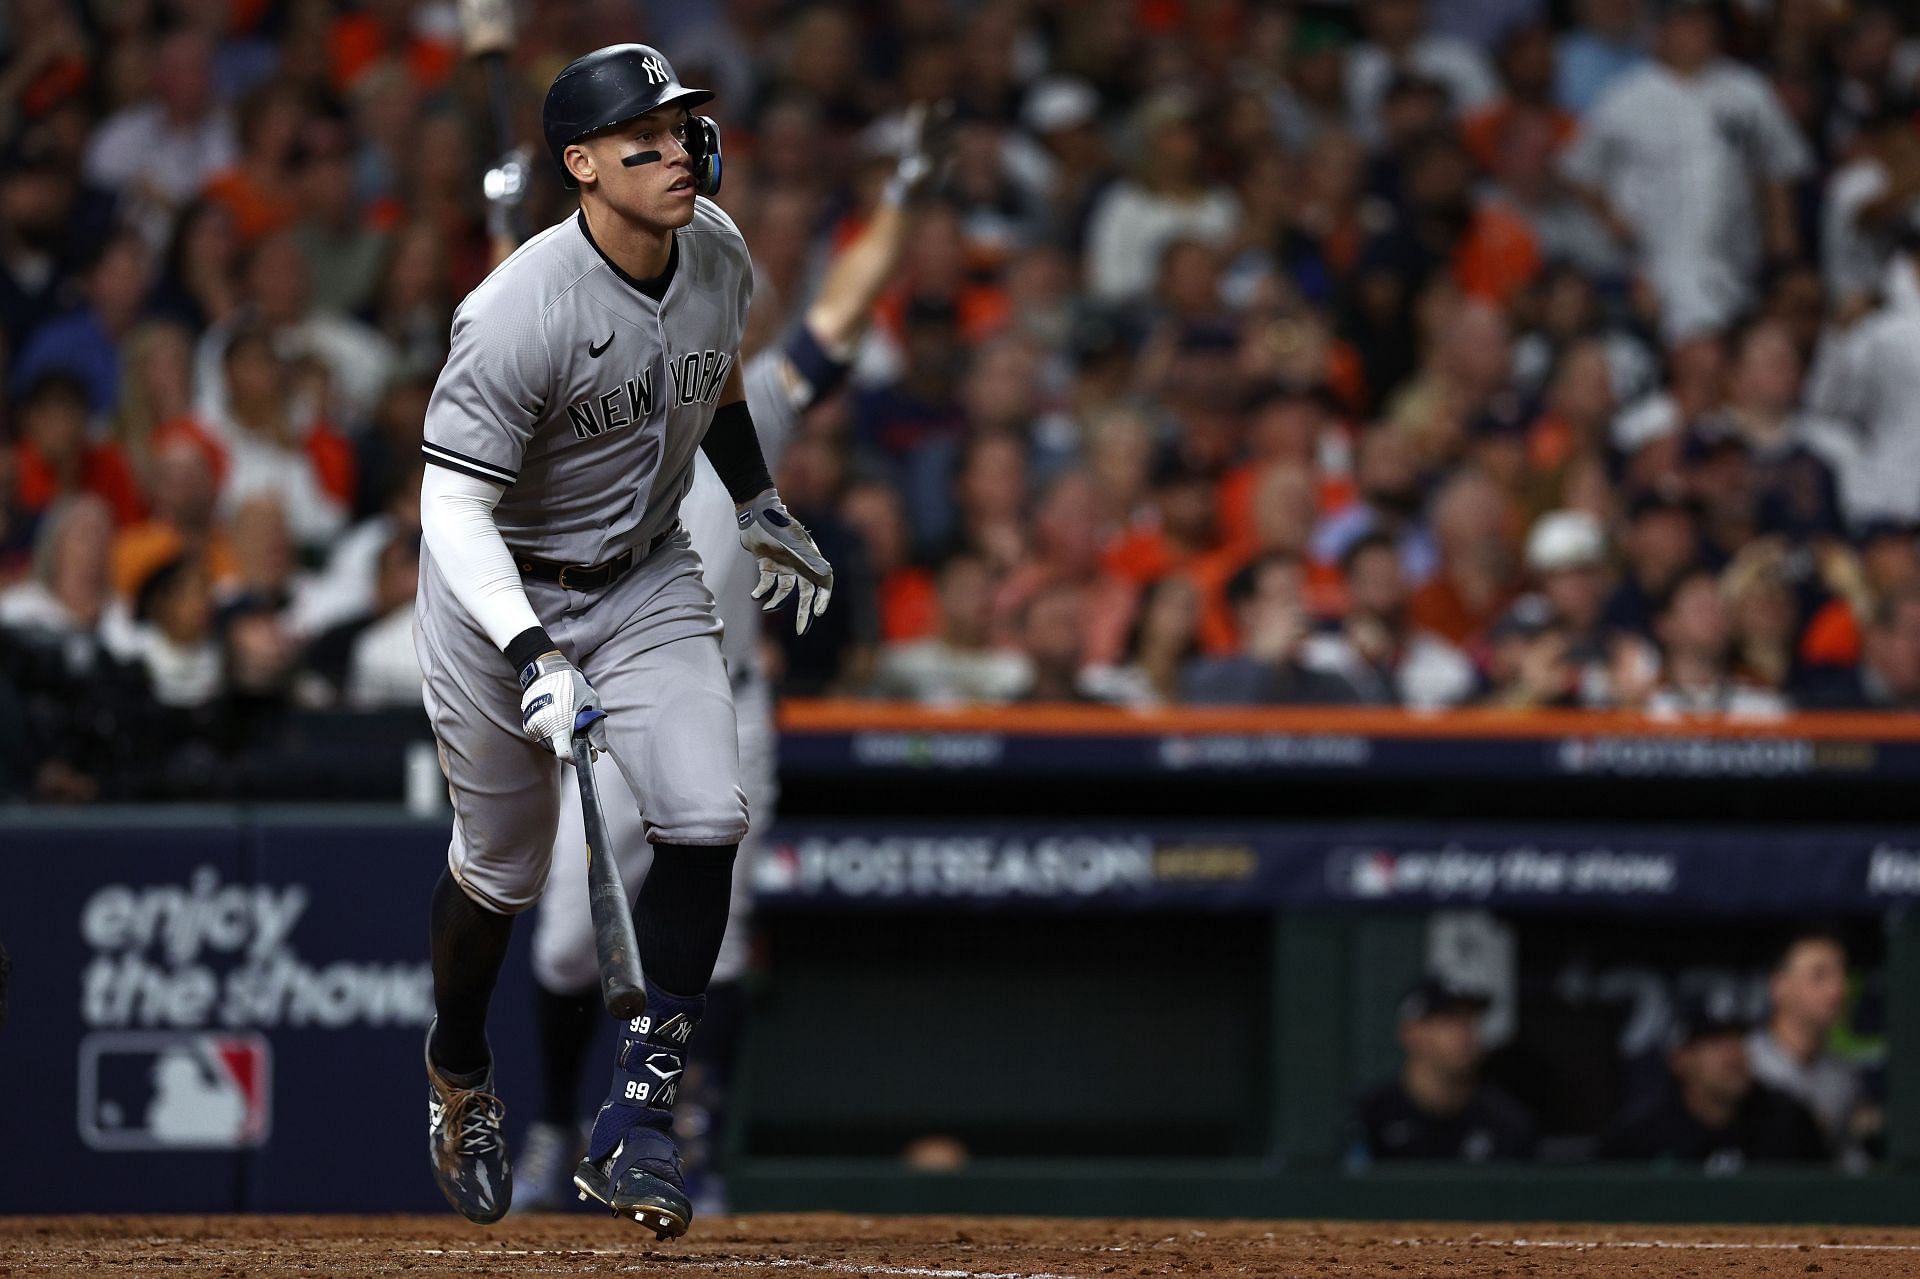 Aaron Judge hits a fly ball against the Houston Astros at Minute Maid Park.